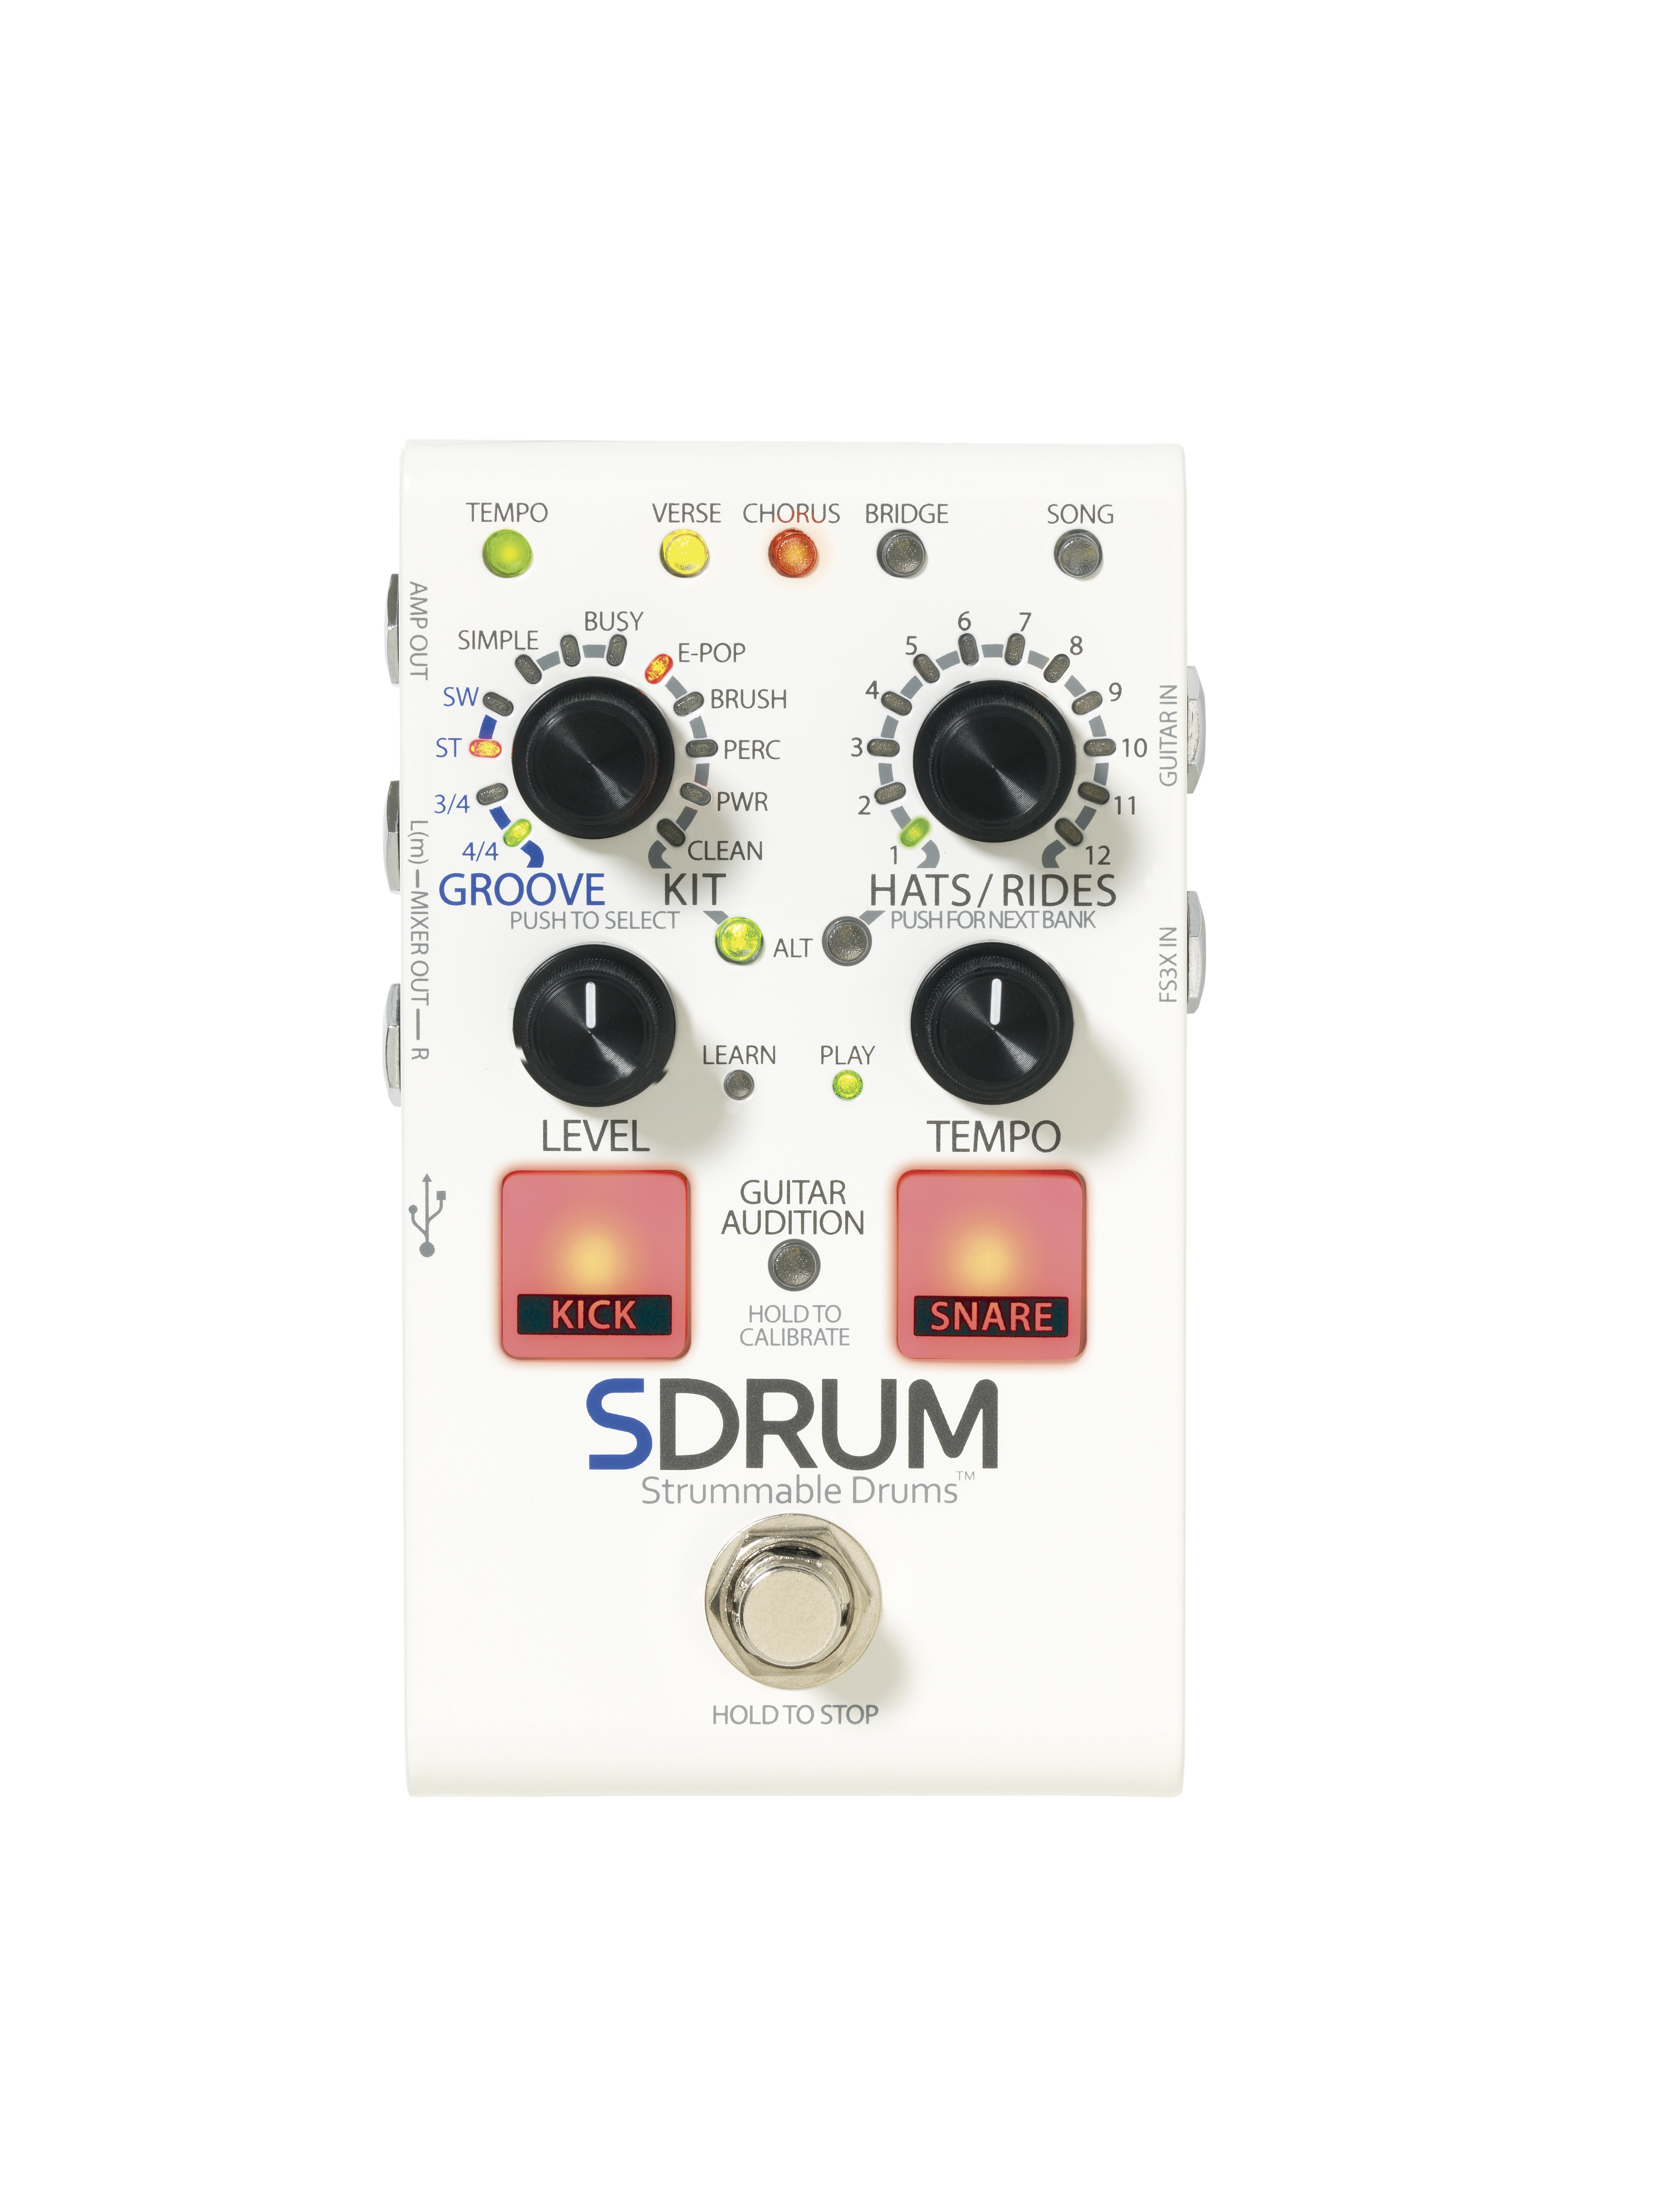 SDRUM Strummable Drums 専用ペダル付き